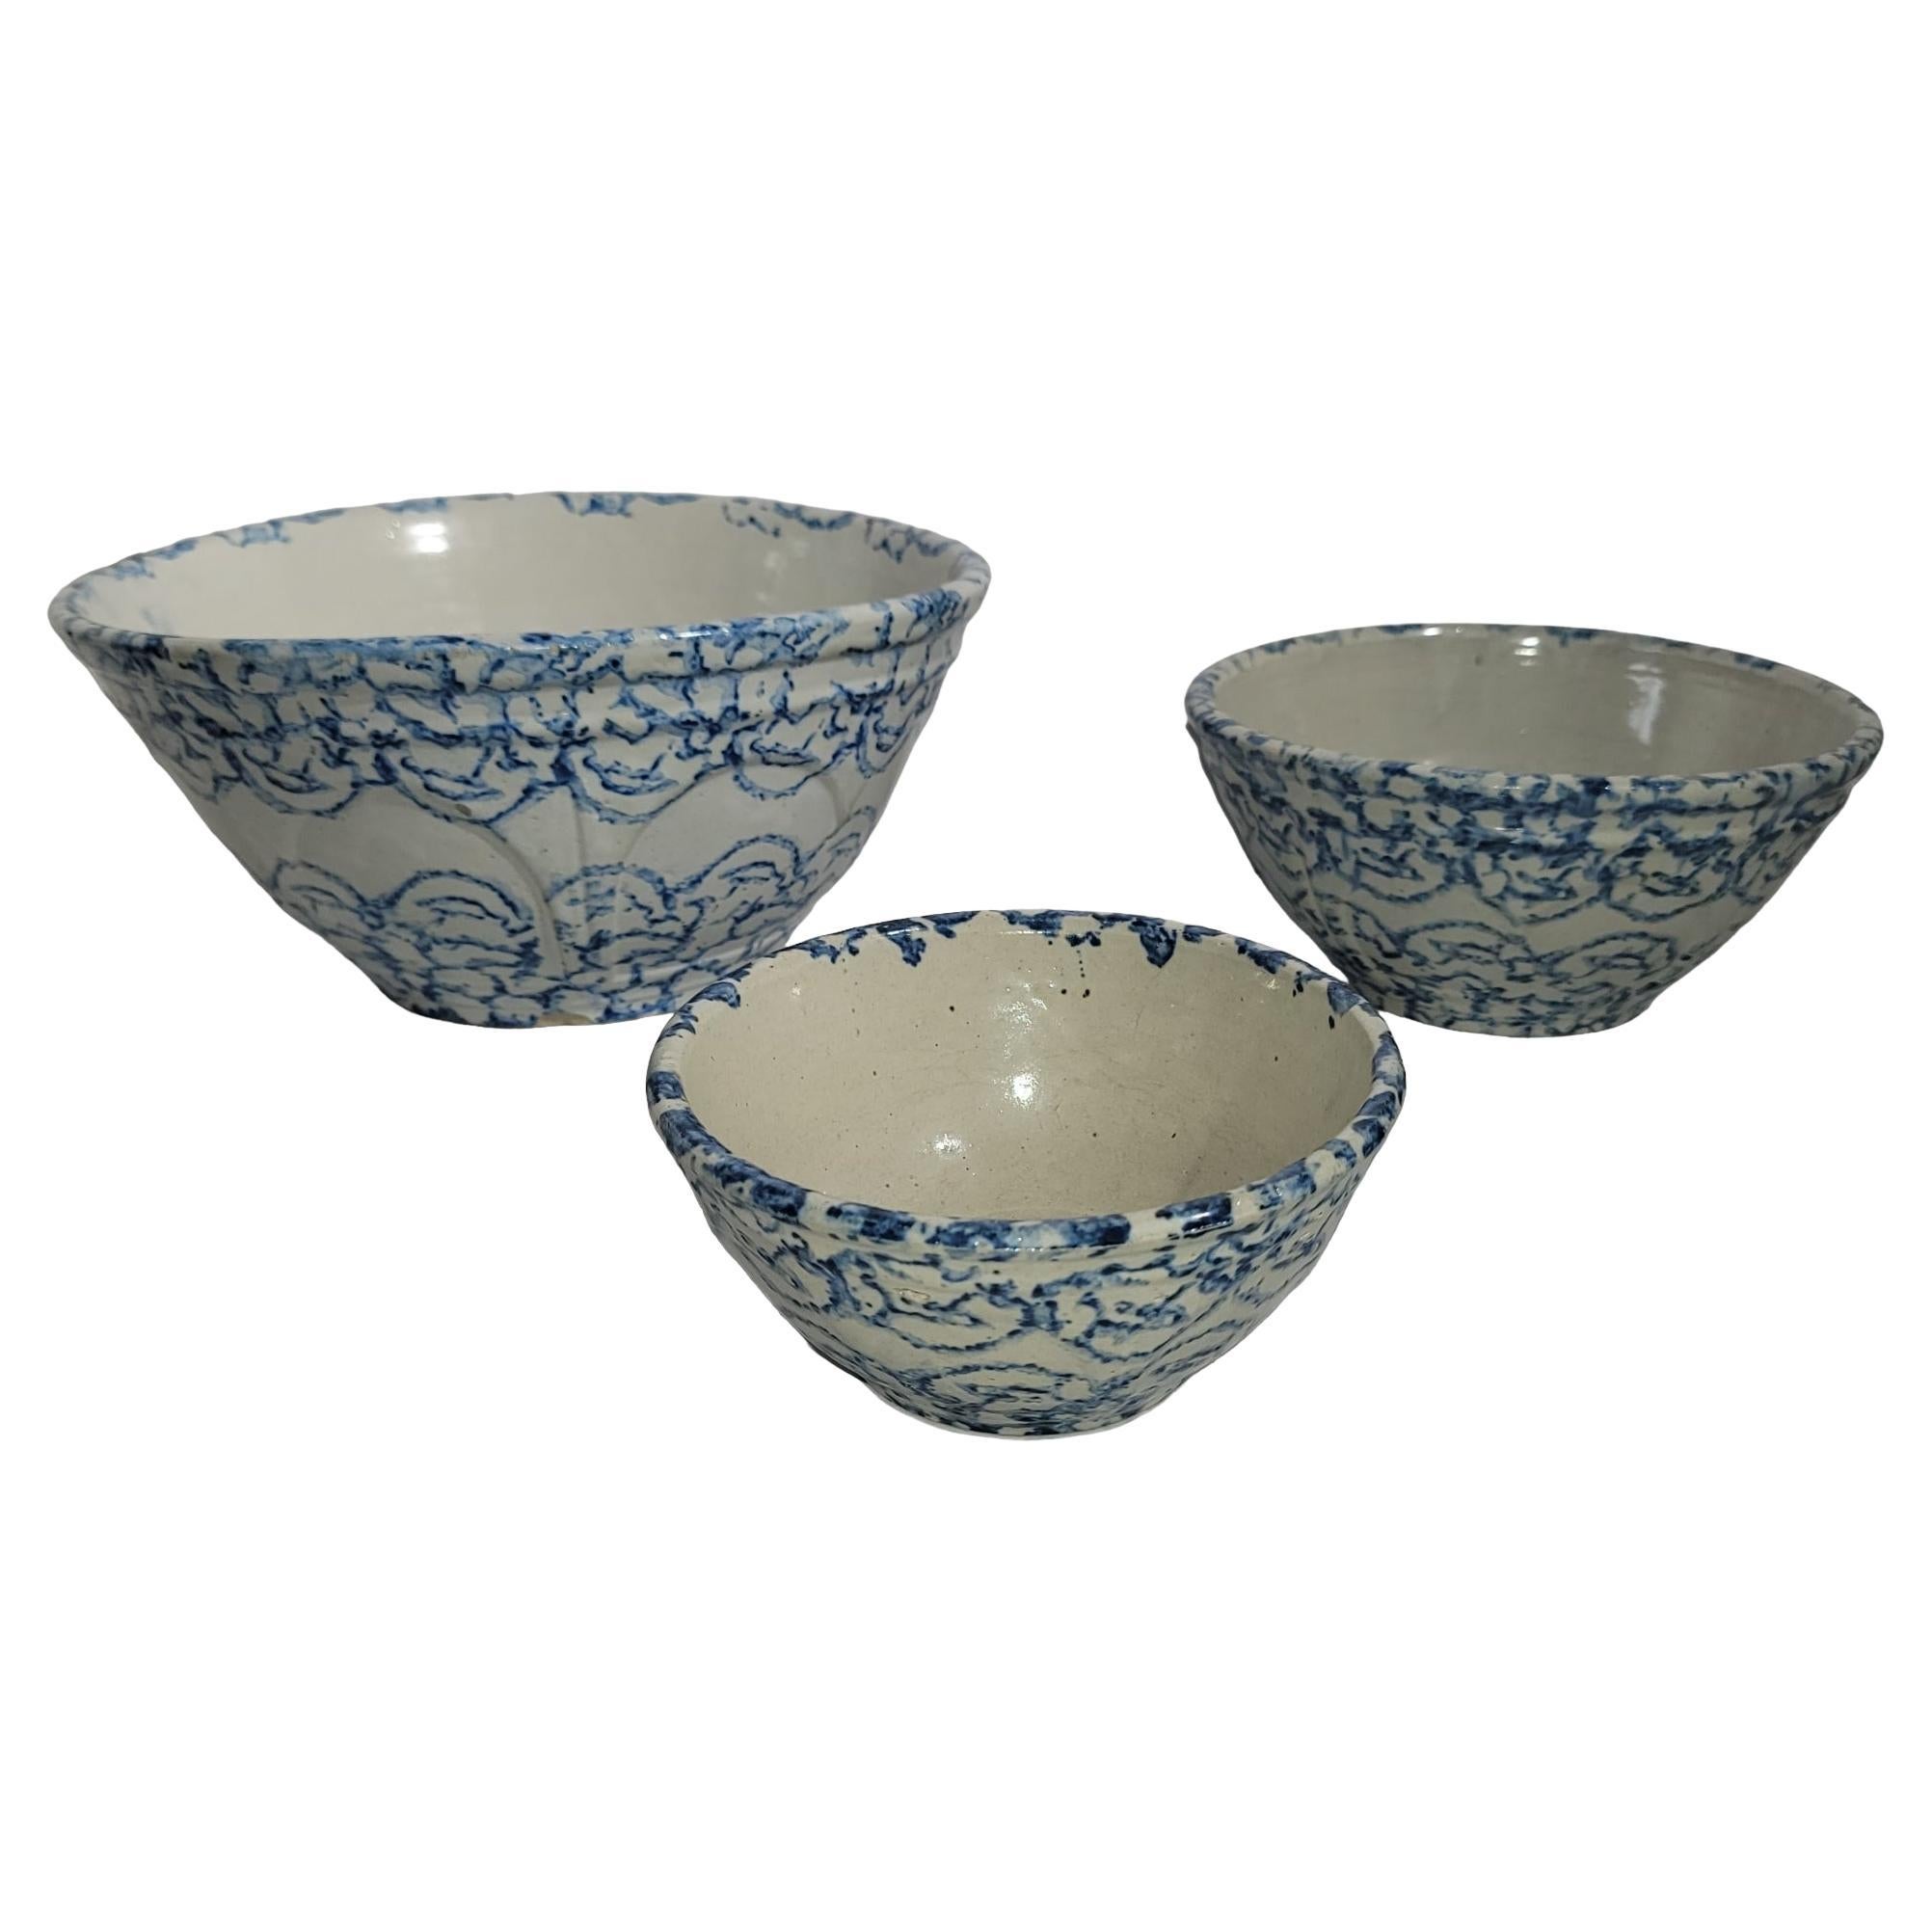 Collection of Three 19thc Sponge Ware Bowls, 3